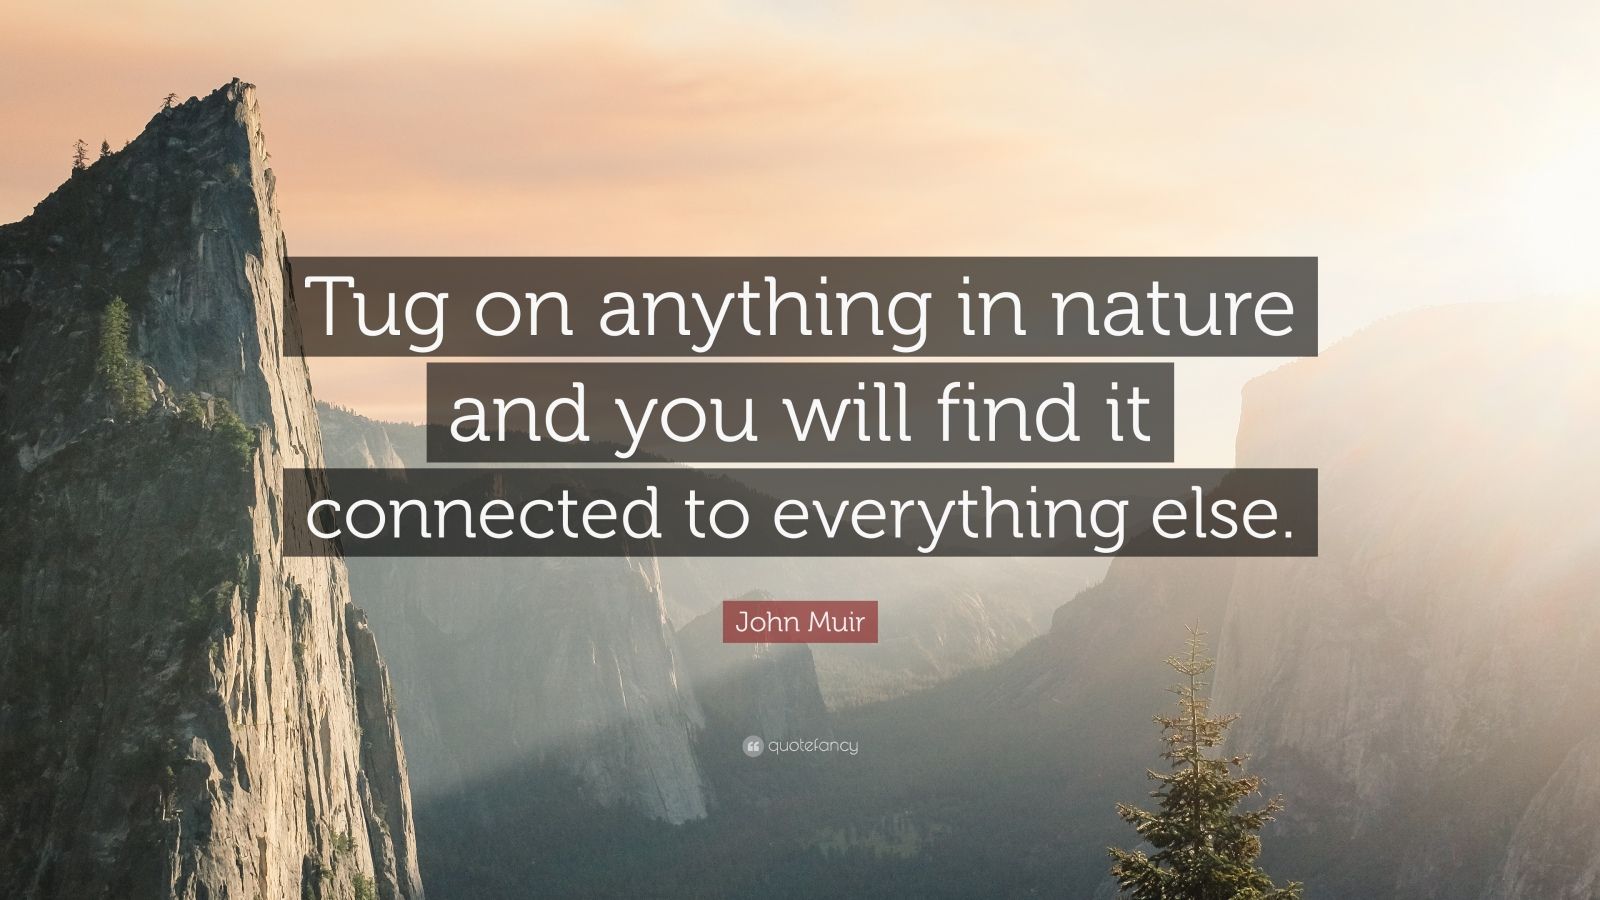 John Muir Quote: “Tug on anything in nature and you will find it